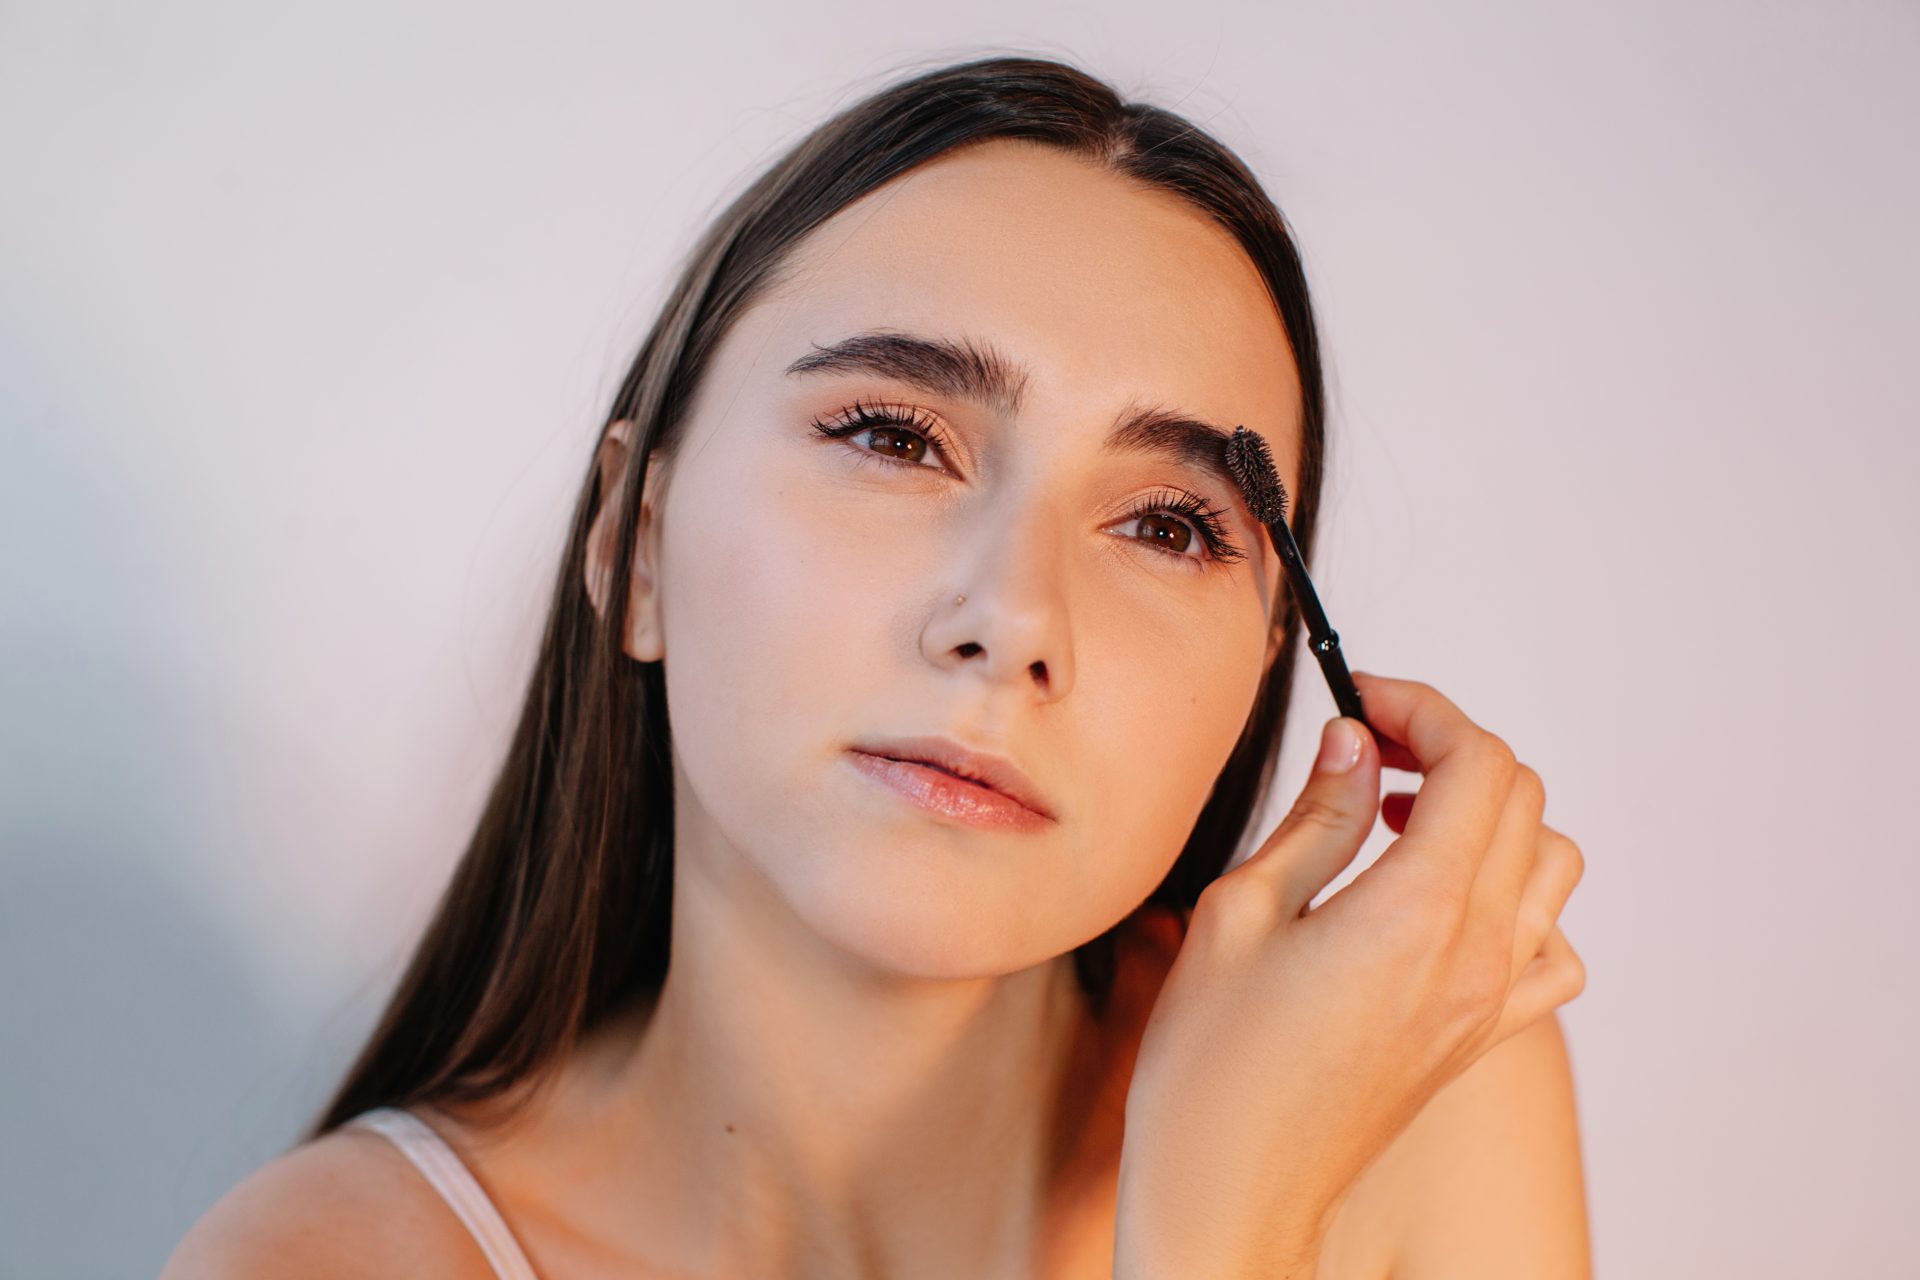 Castor oil for eyebrows: does it really work?